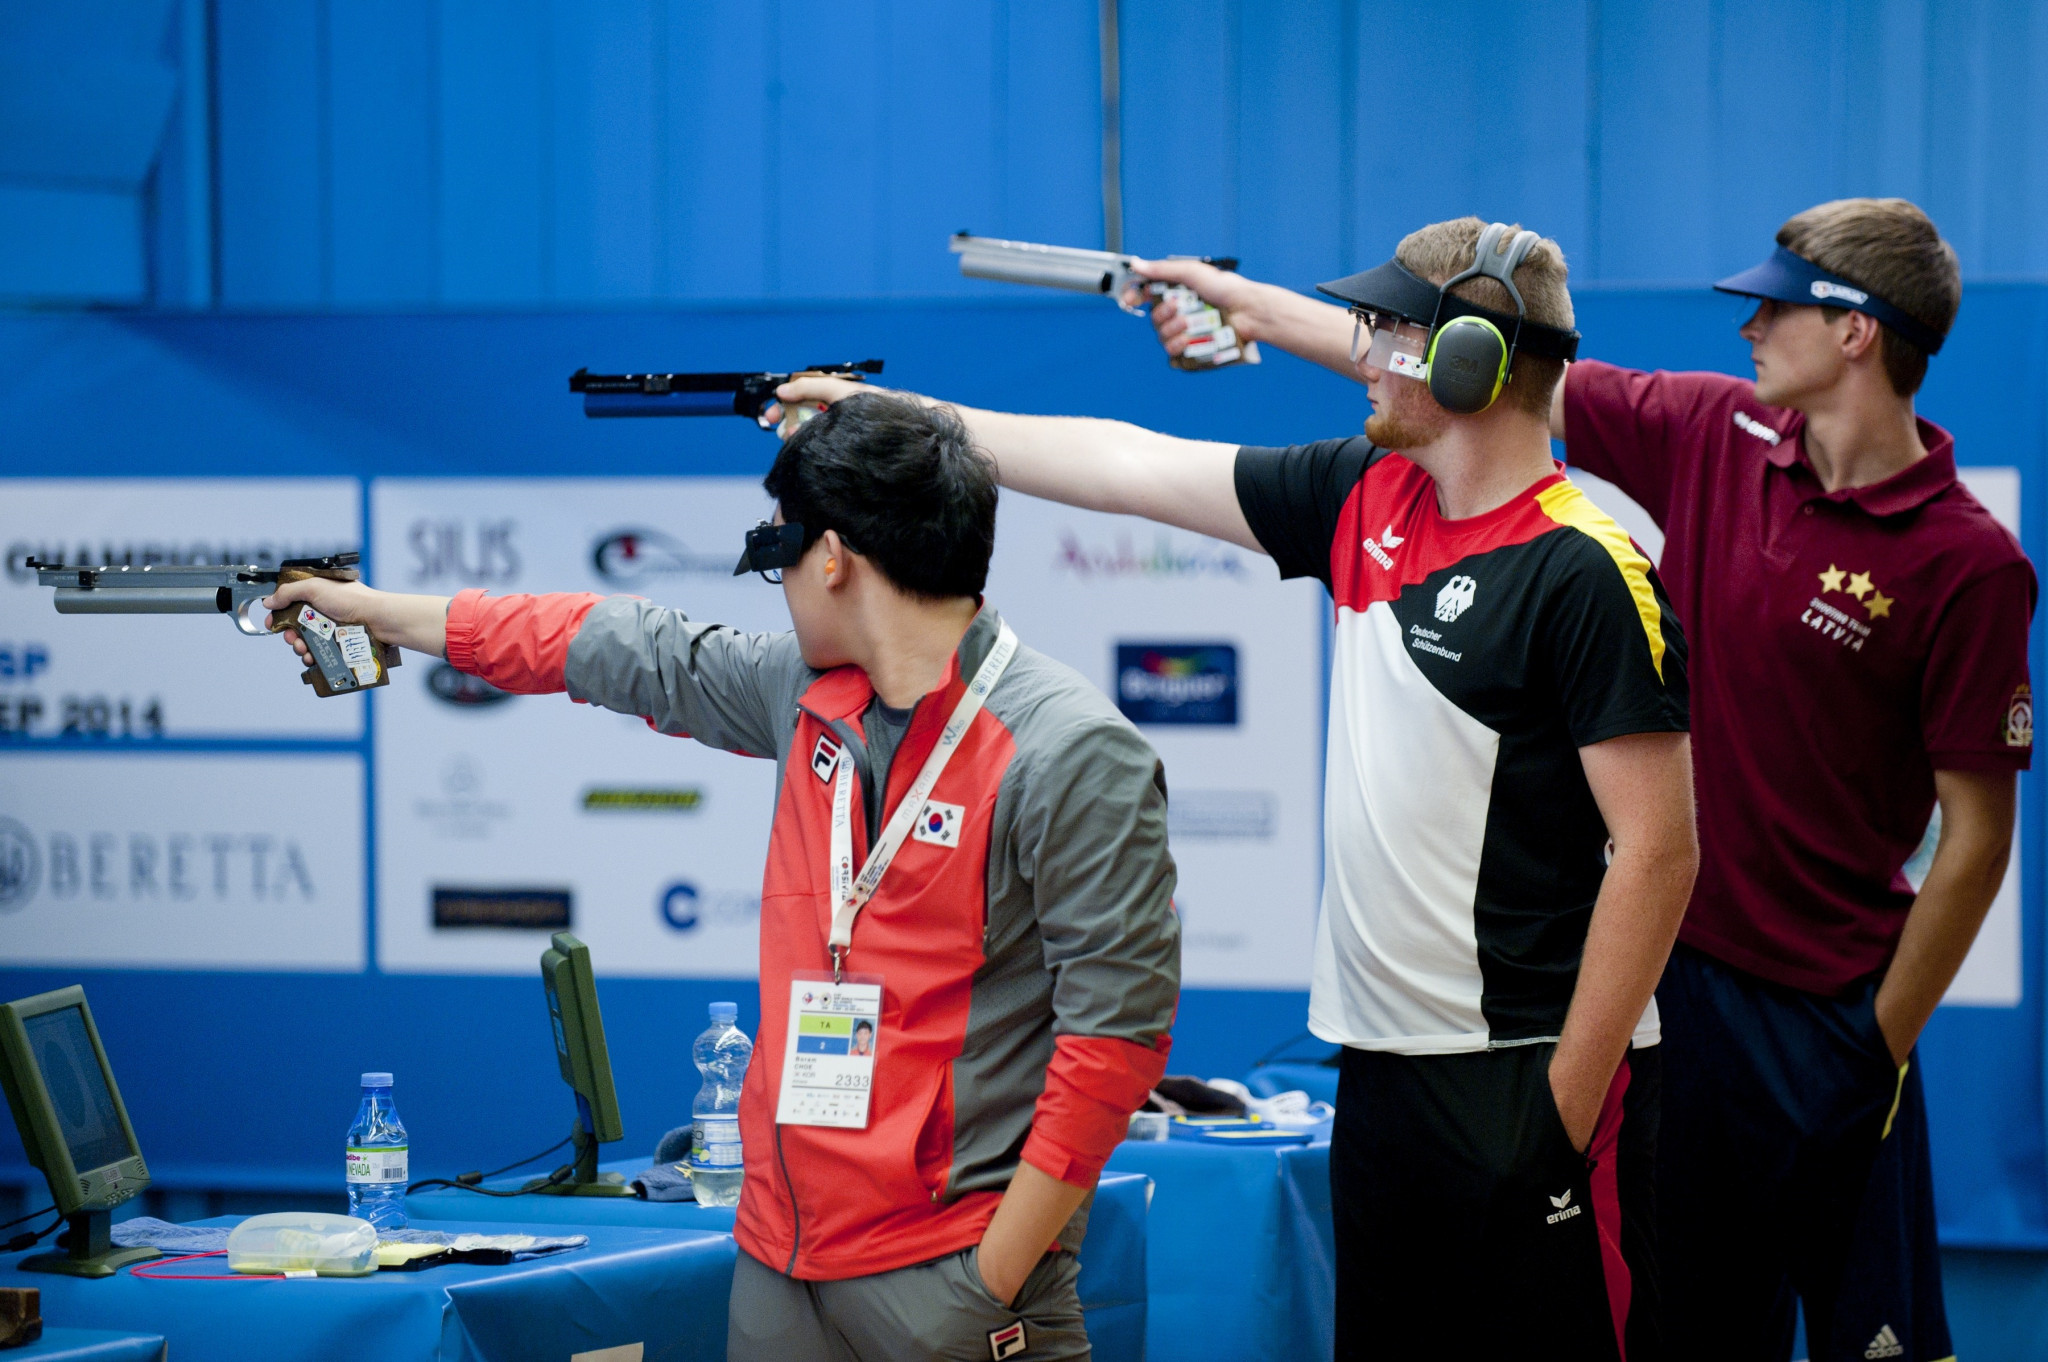 A new Championships calendar will be proposed to the ISSF General Assembly in November 2018 ©Getty Images